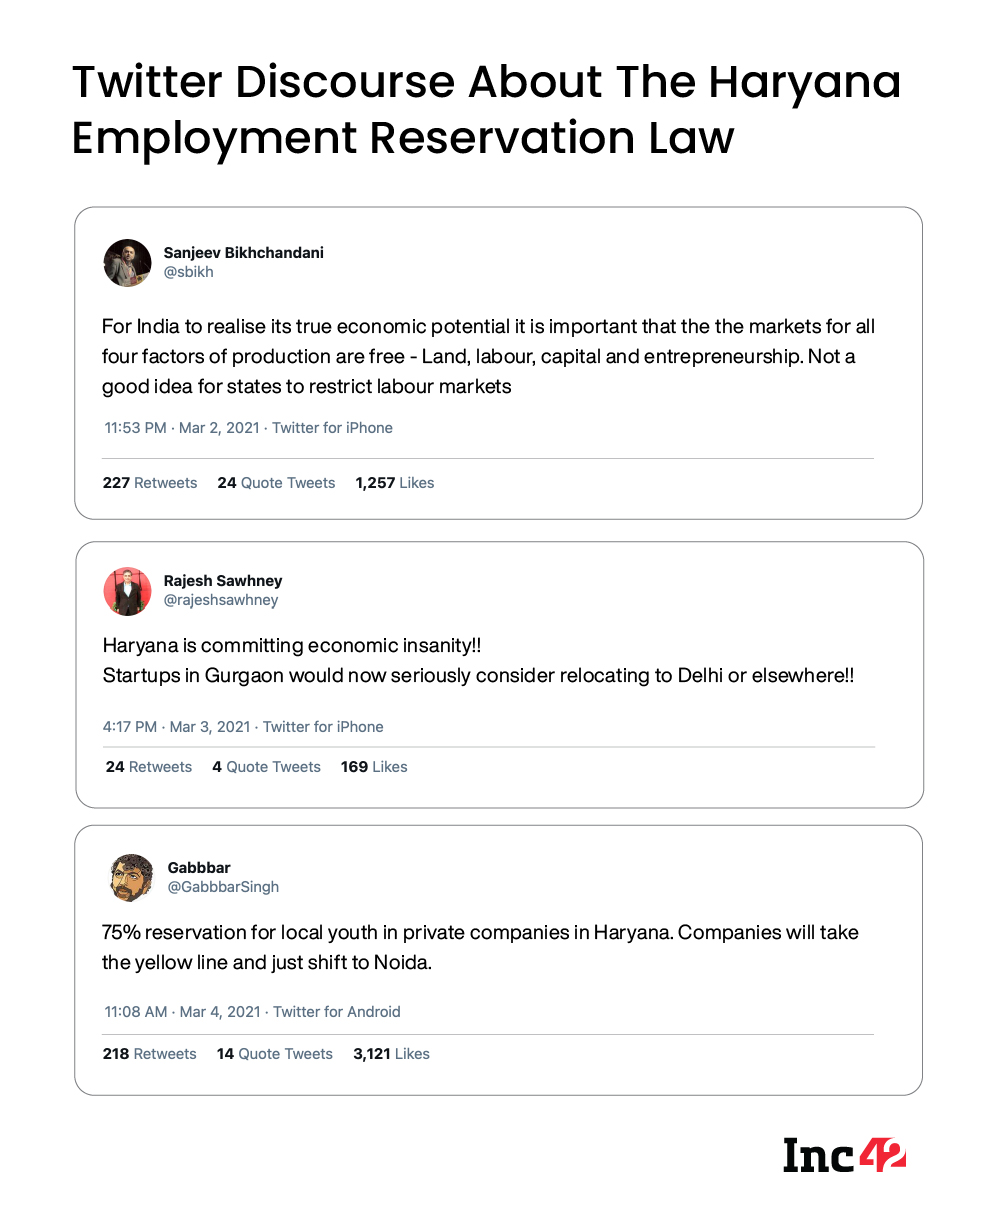 Twitter Discourse About Haryana EMployment Reservation